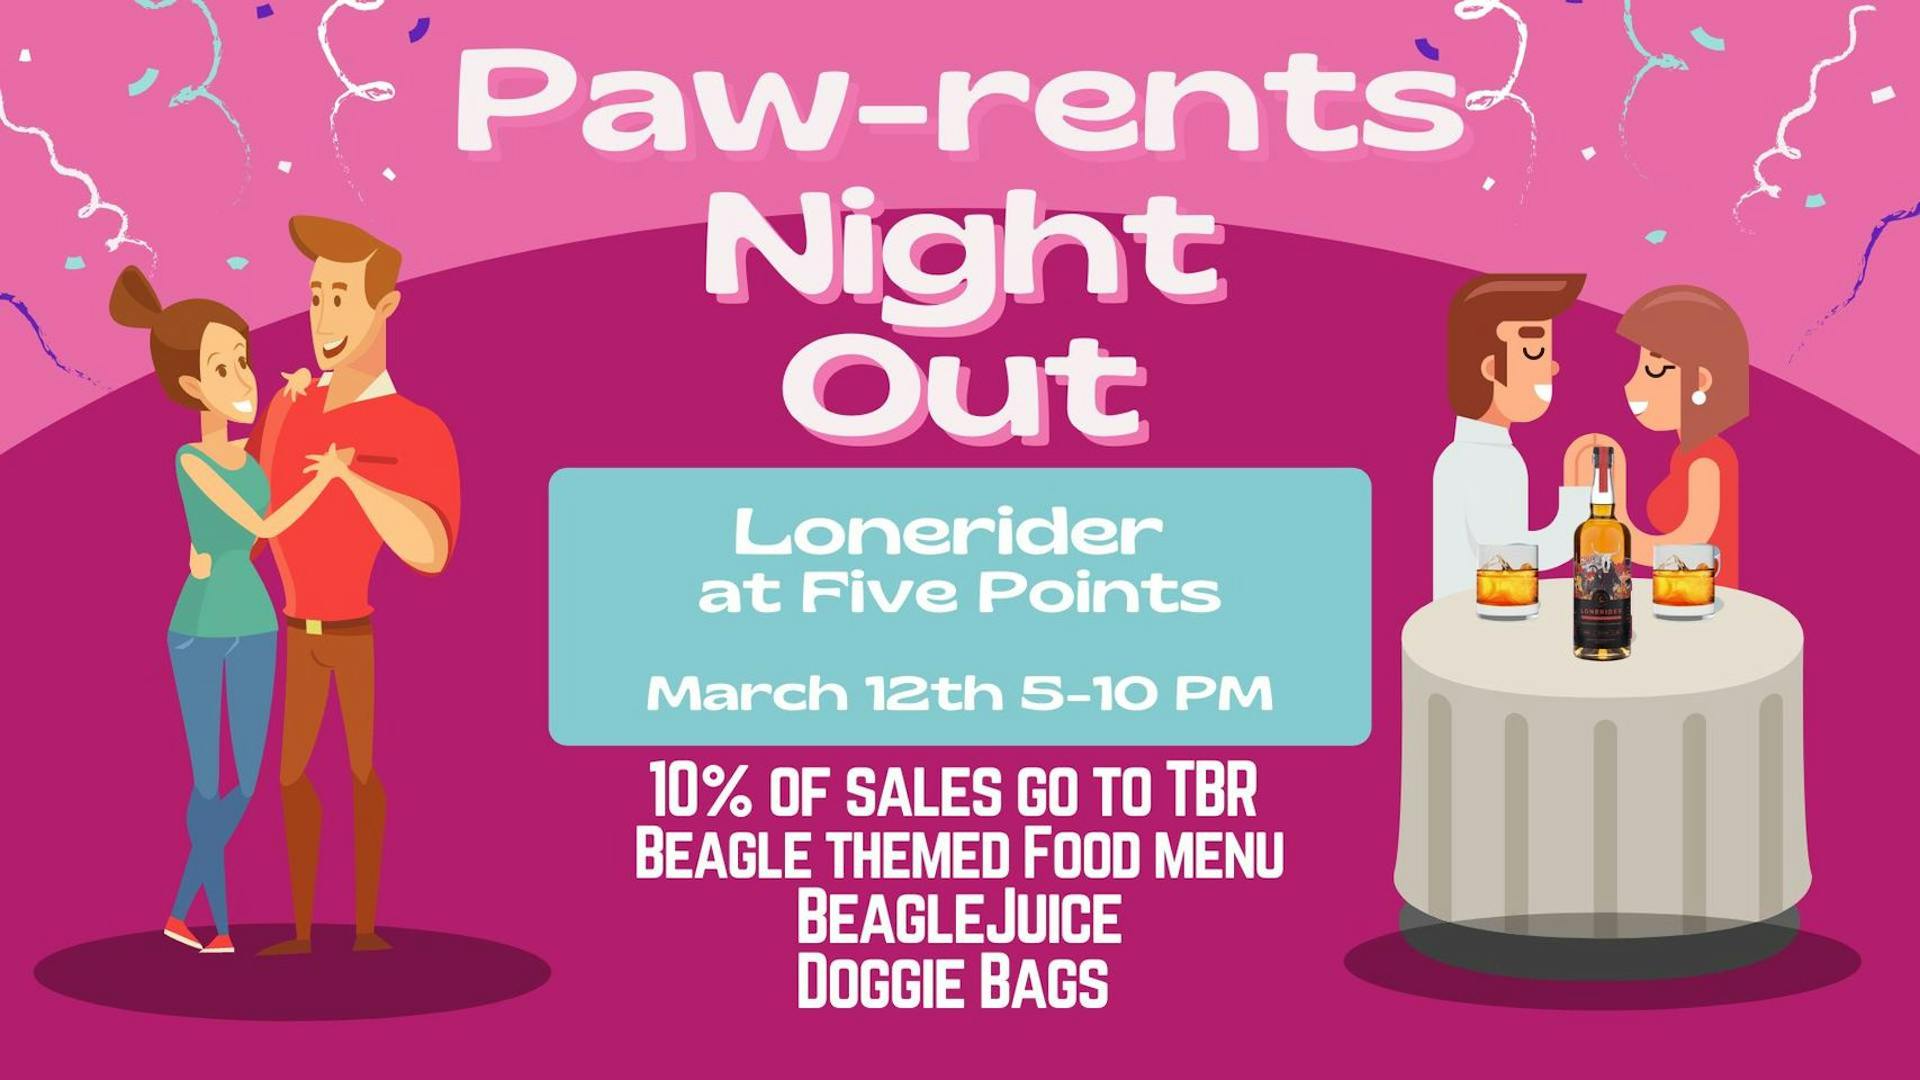 Pawrents Night Out at Lonerider